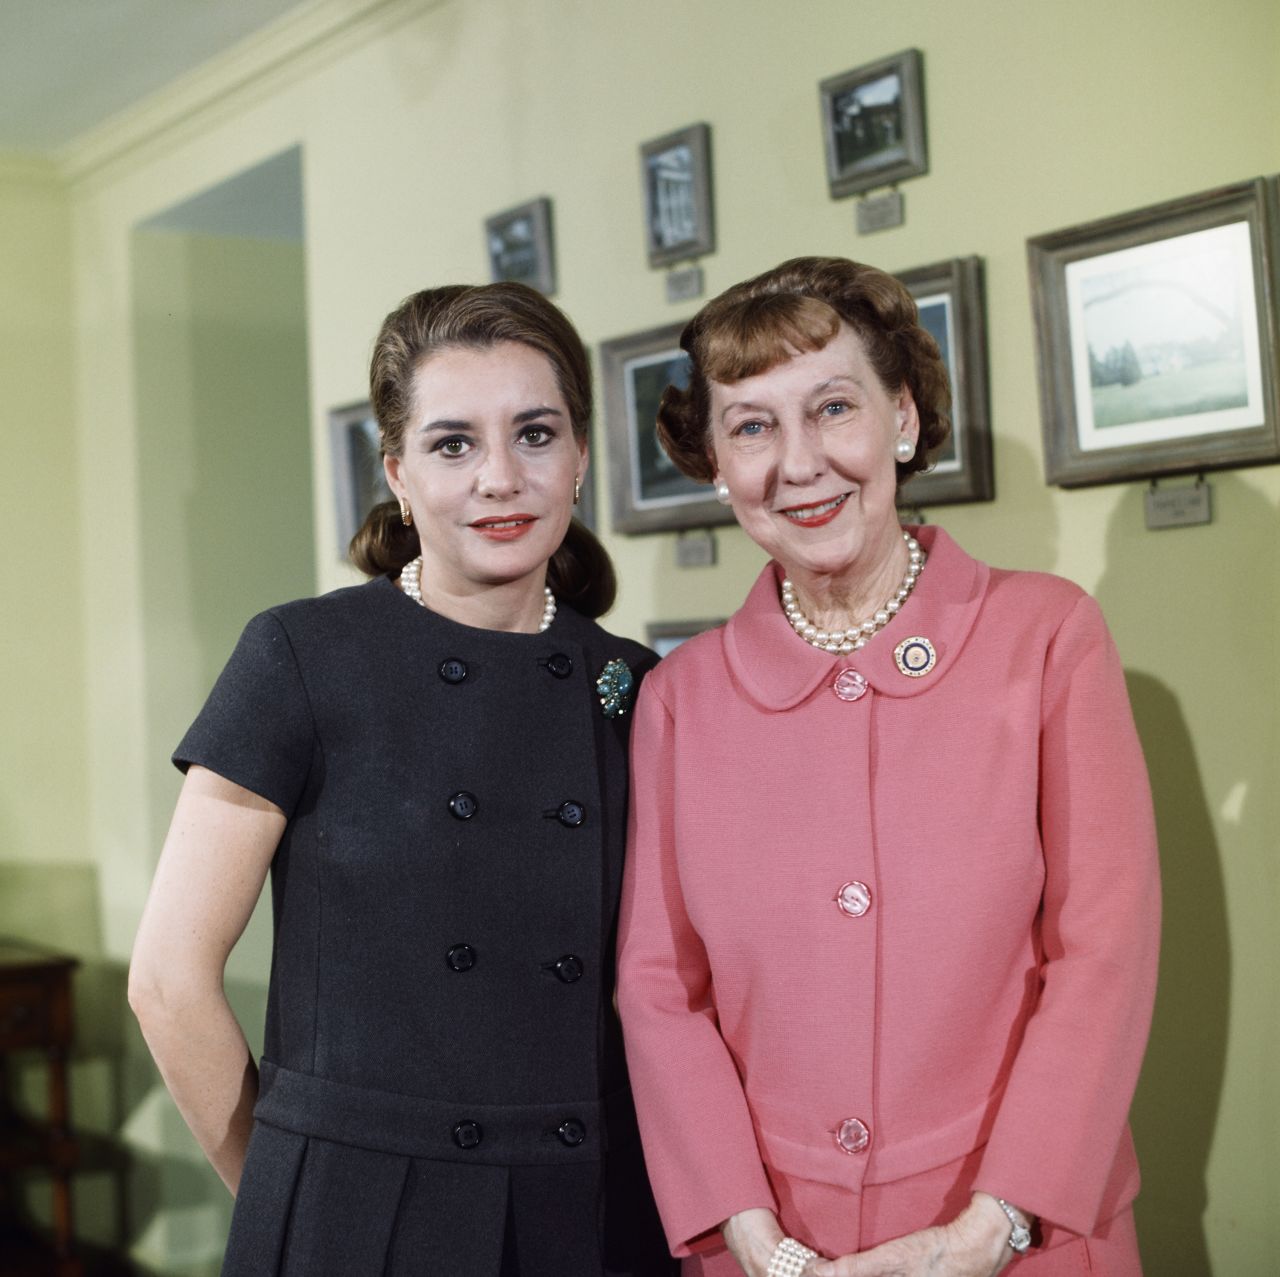 Walters interviewed former first lady Mamie Eisenhower during a special tribute to the late President in 1970.